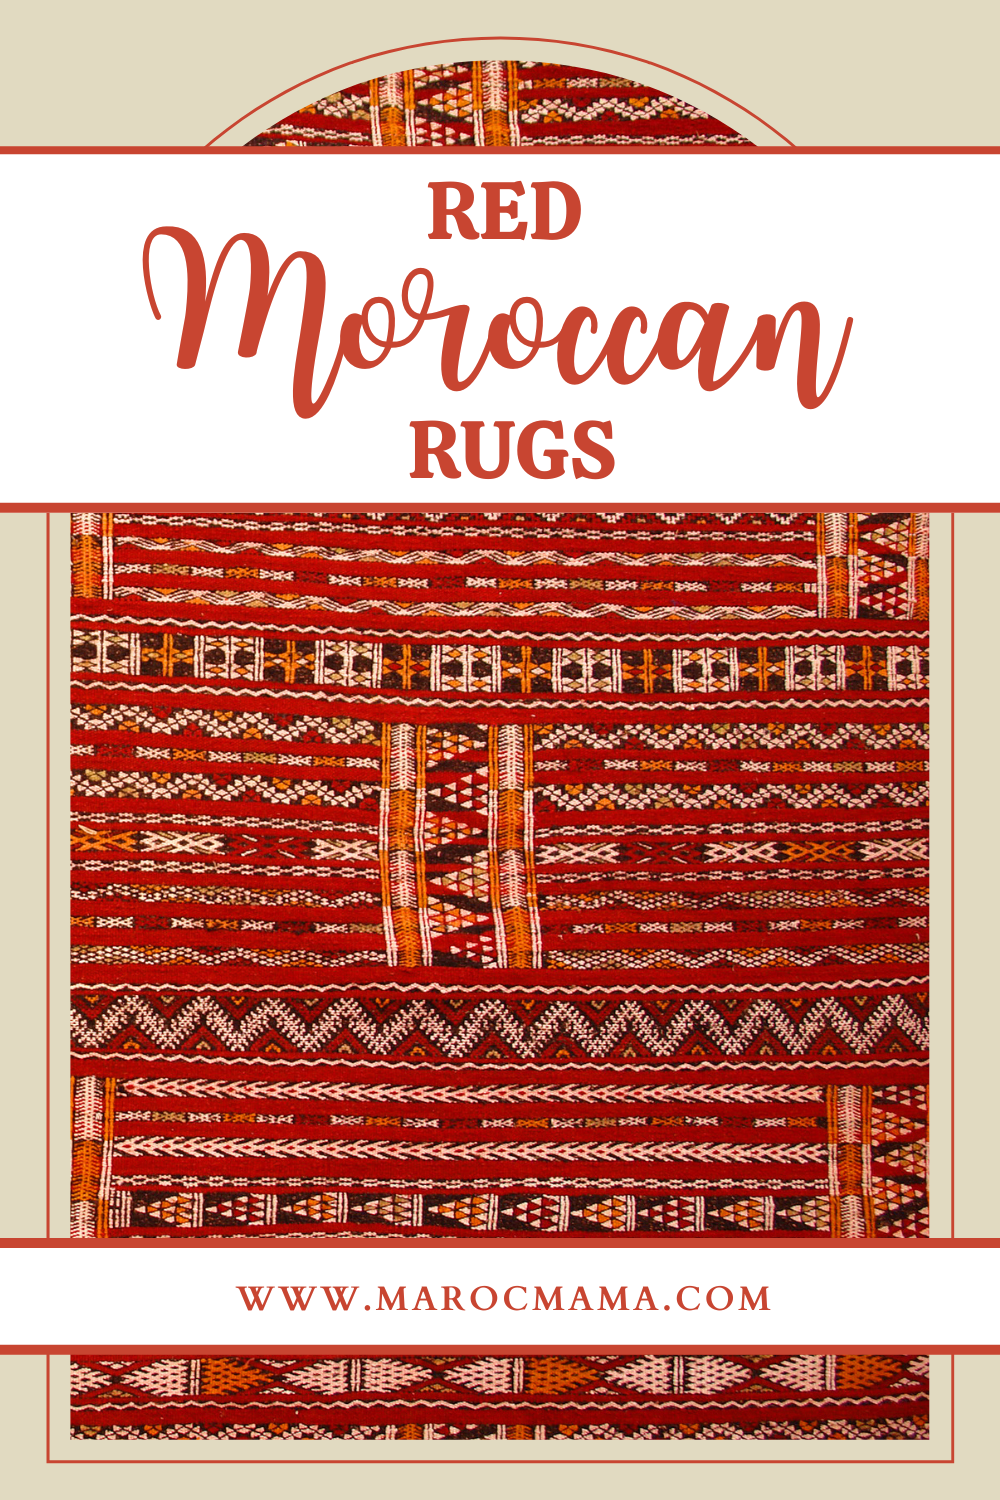 red Moroccan rugs with design